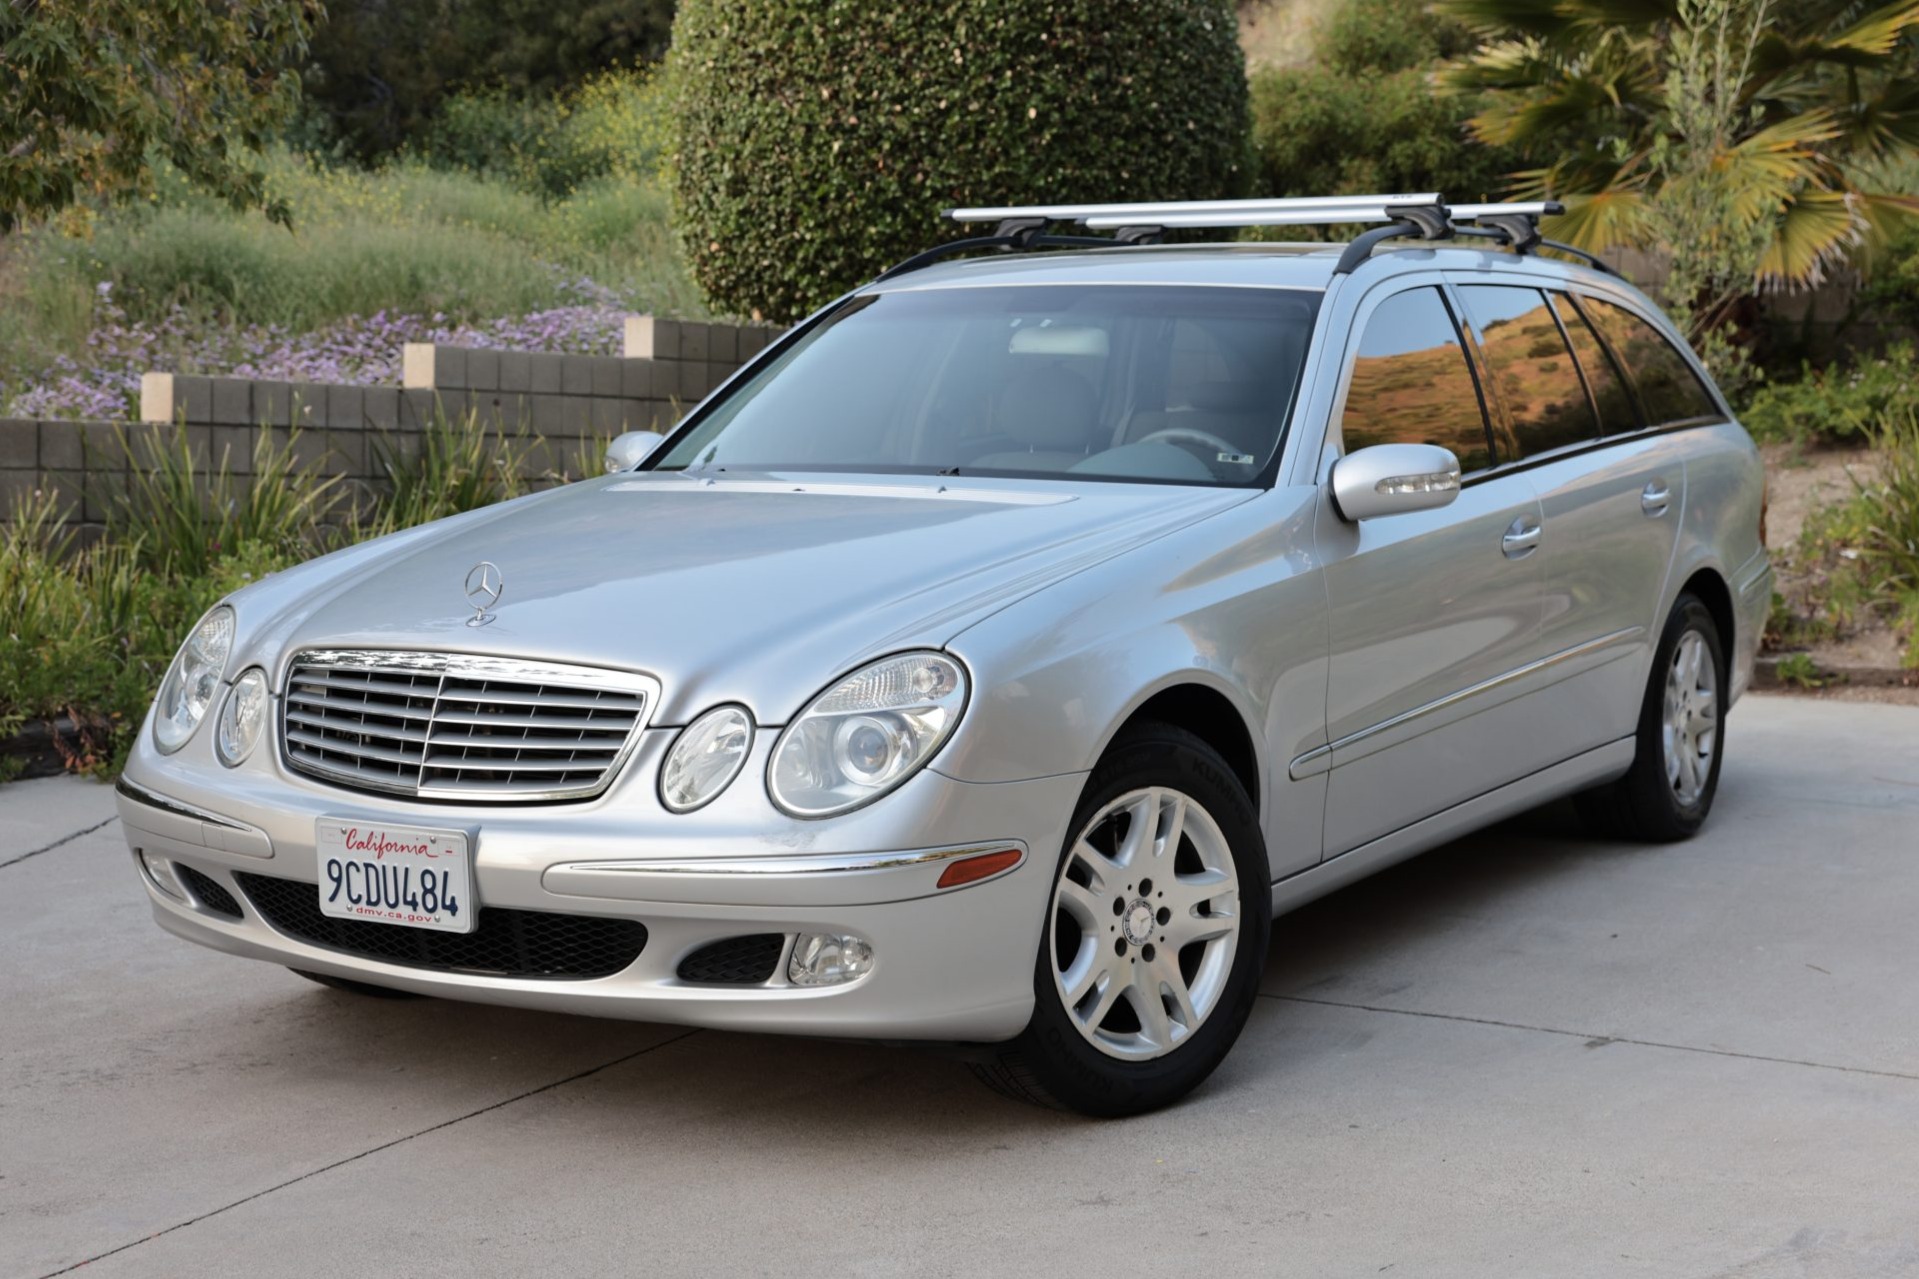 Used 2004 Mercedes-Benz E320 4MATIC Wagon Review